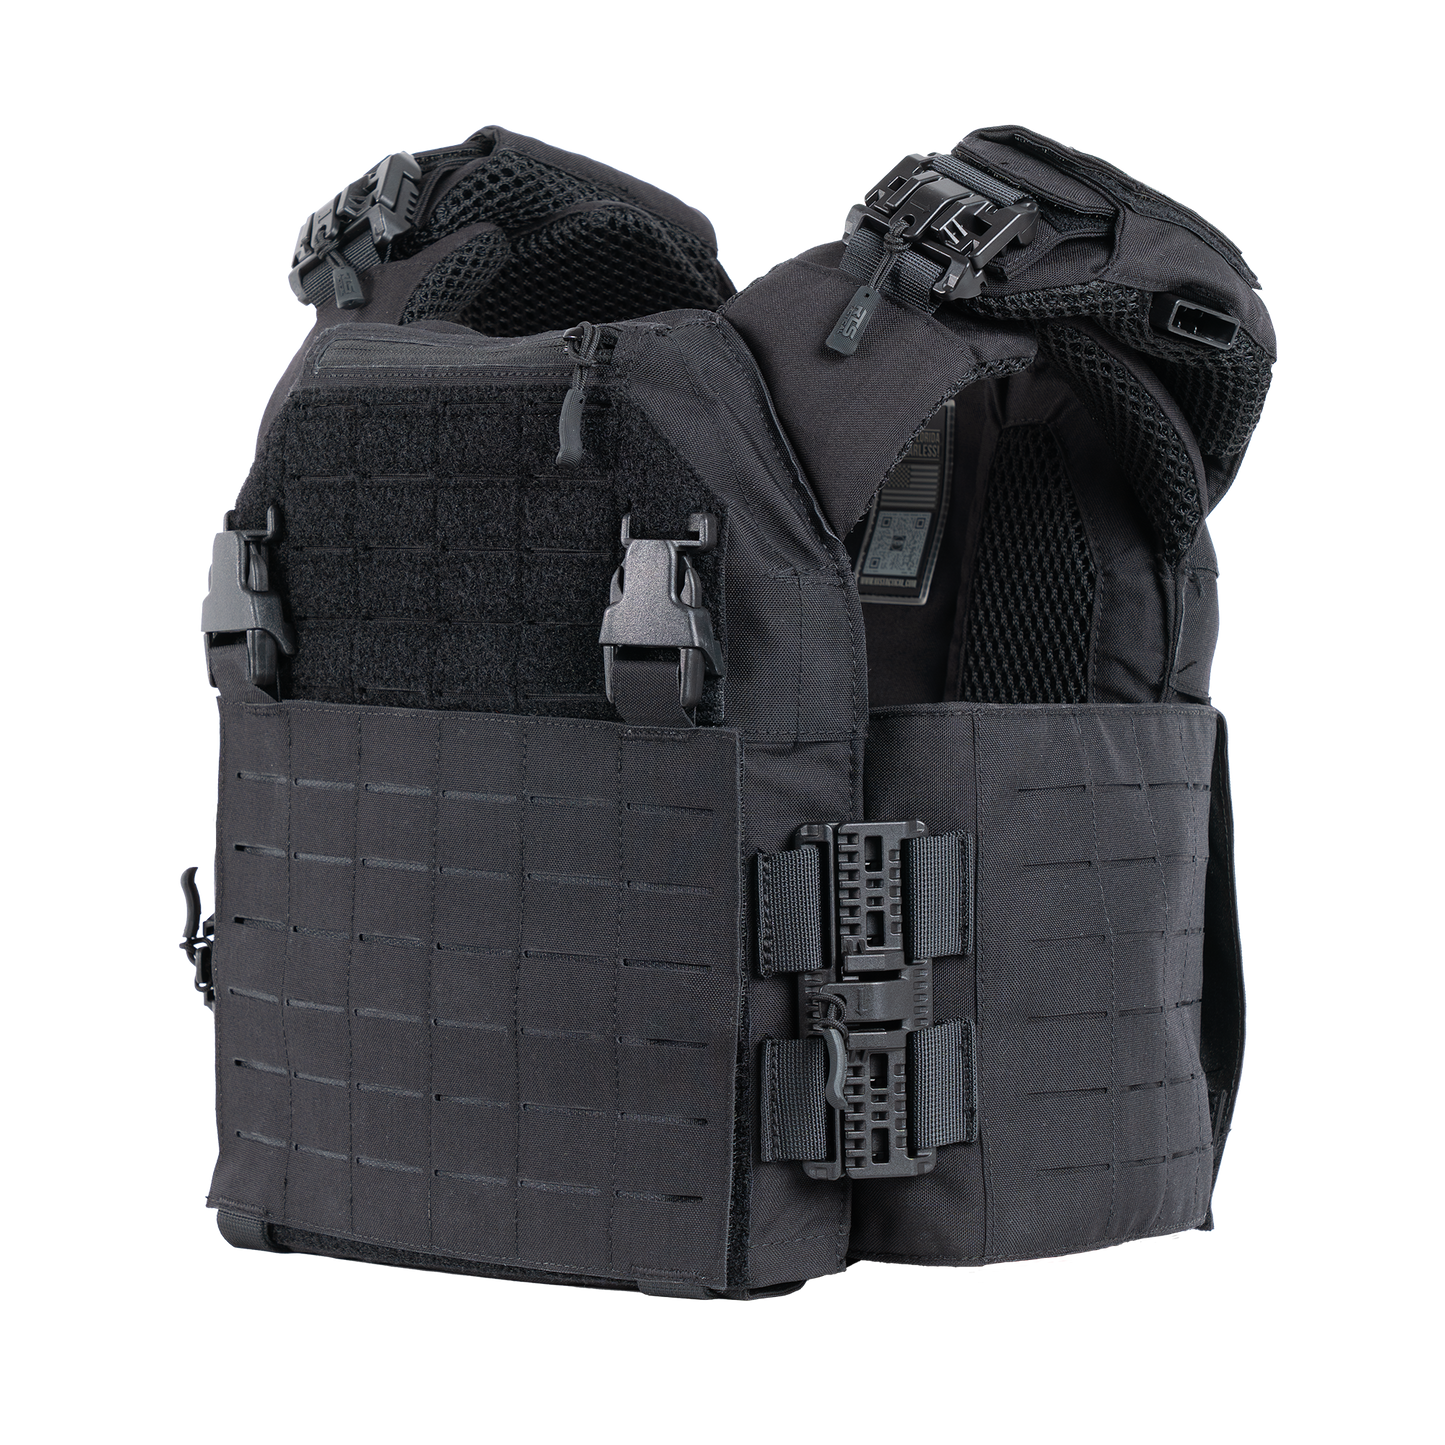 RTS Tactical Level IIIA Soft Armor OPSEC Active Shooter Kit